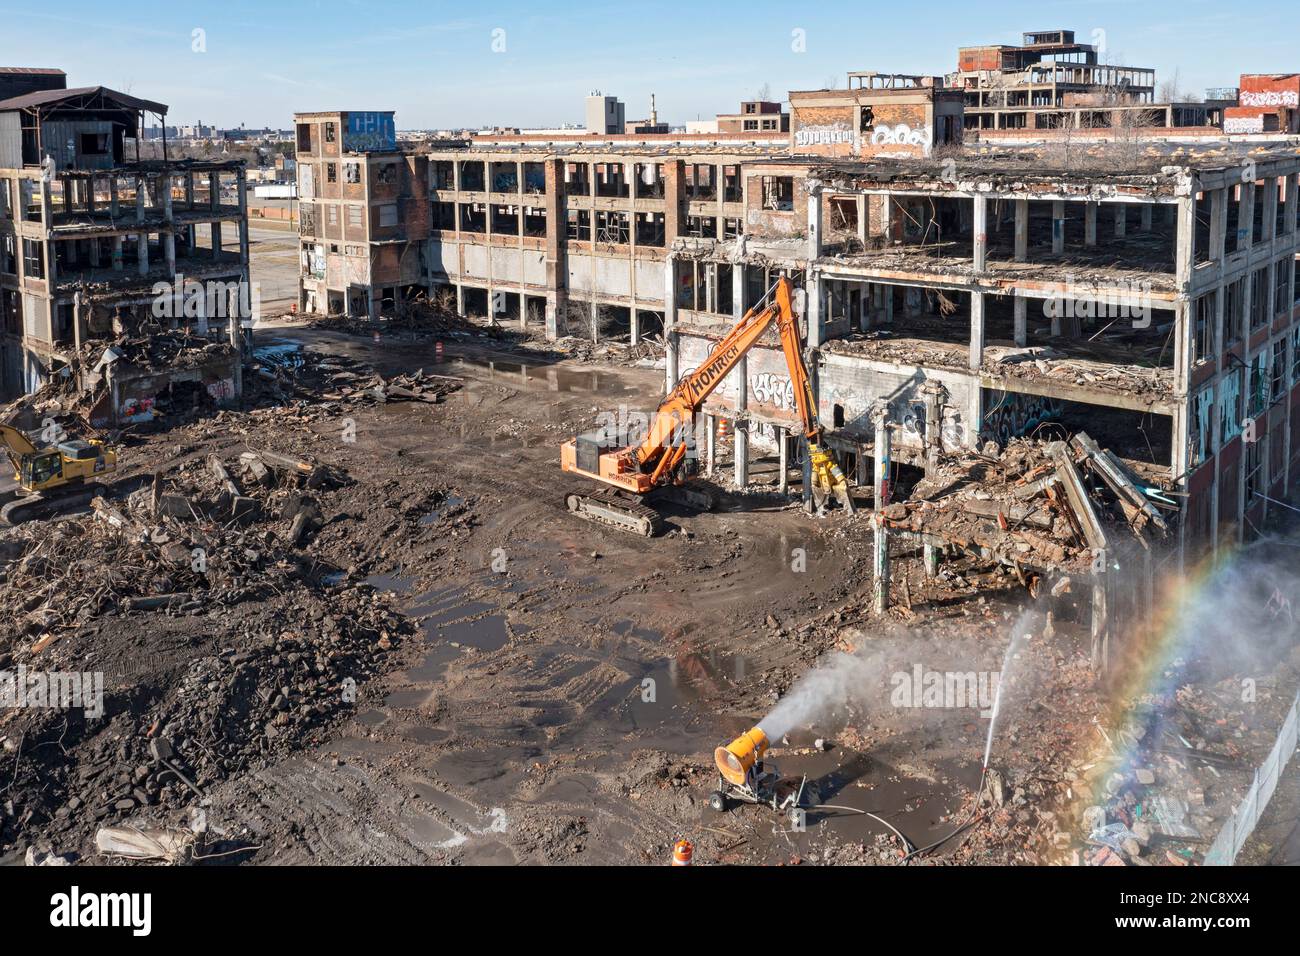 Detroit, Michigan - Demolition of a part of the abandoned Packard auto manufacturing plant. Opened in 1903, the 3.5 million square foot plant employed Stock Photo